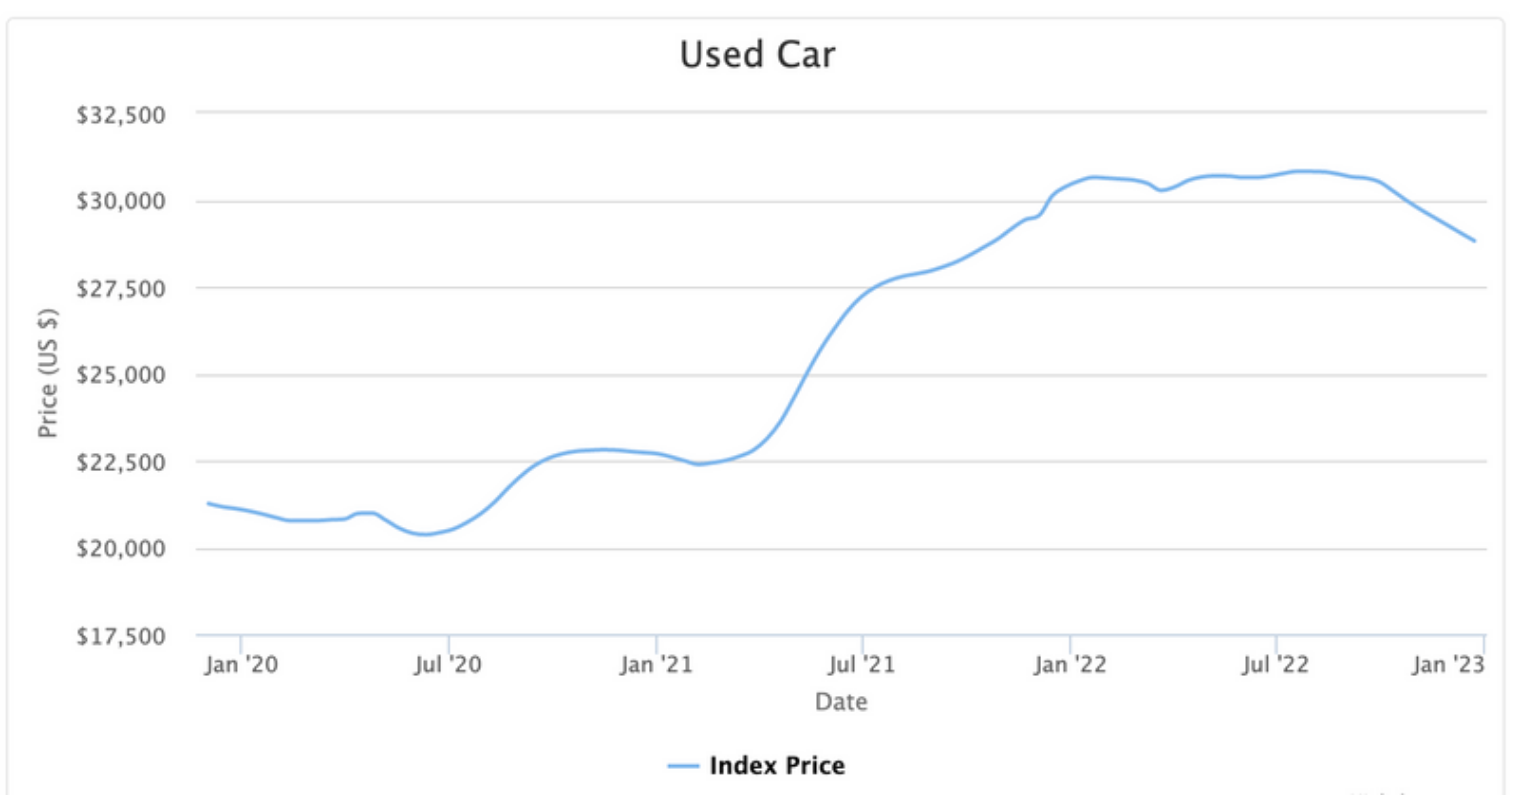 Used car prices chart past 1 year